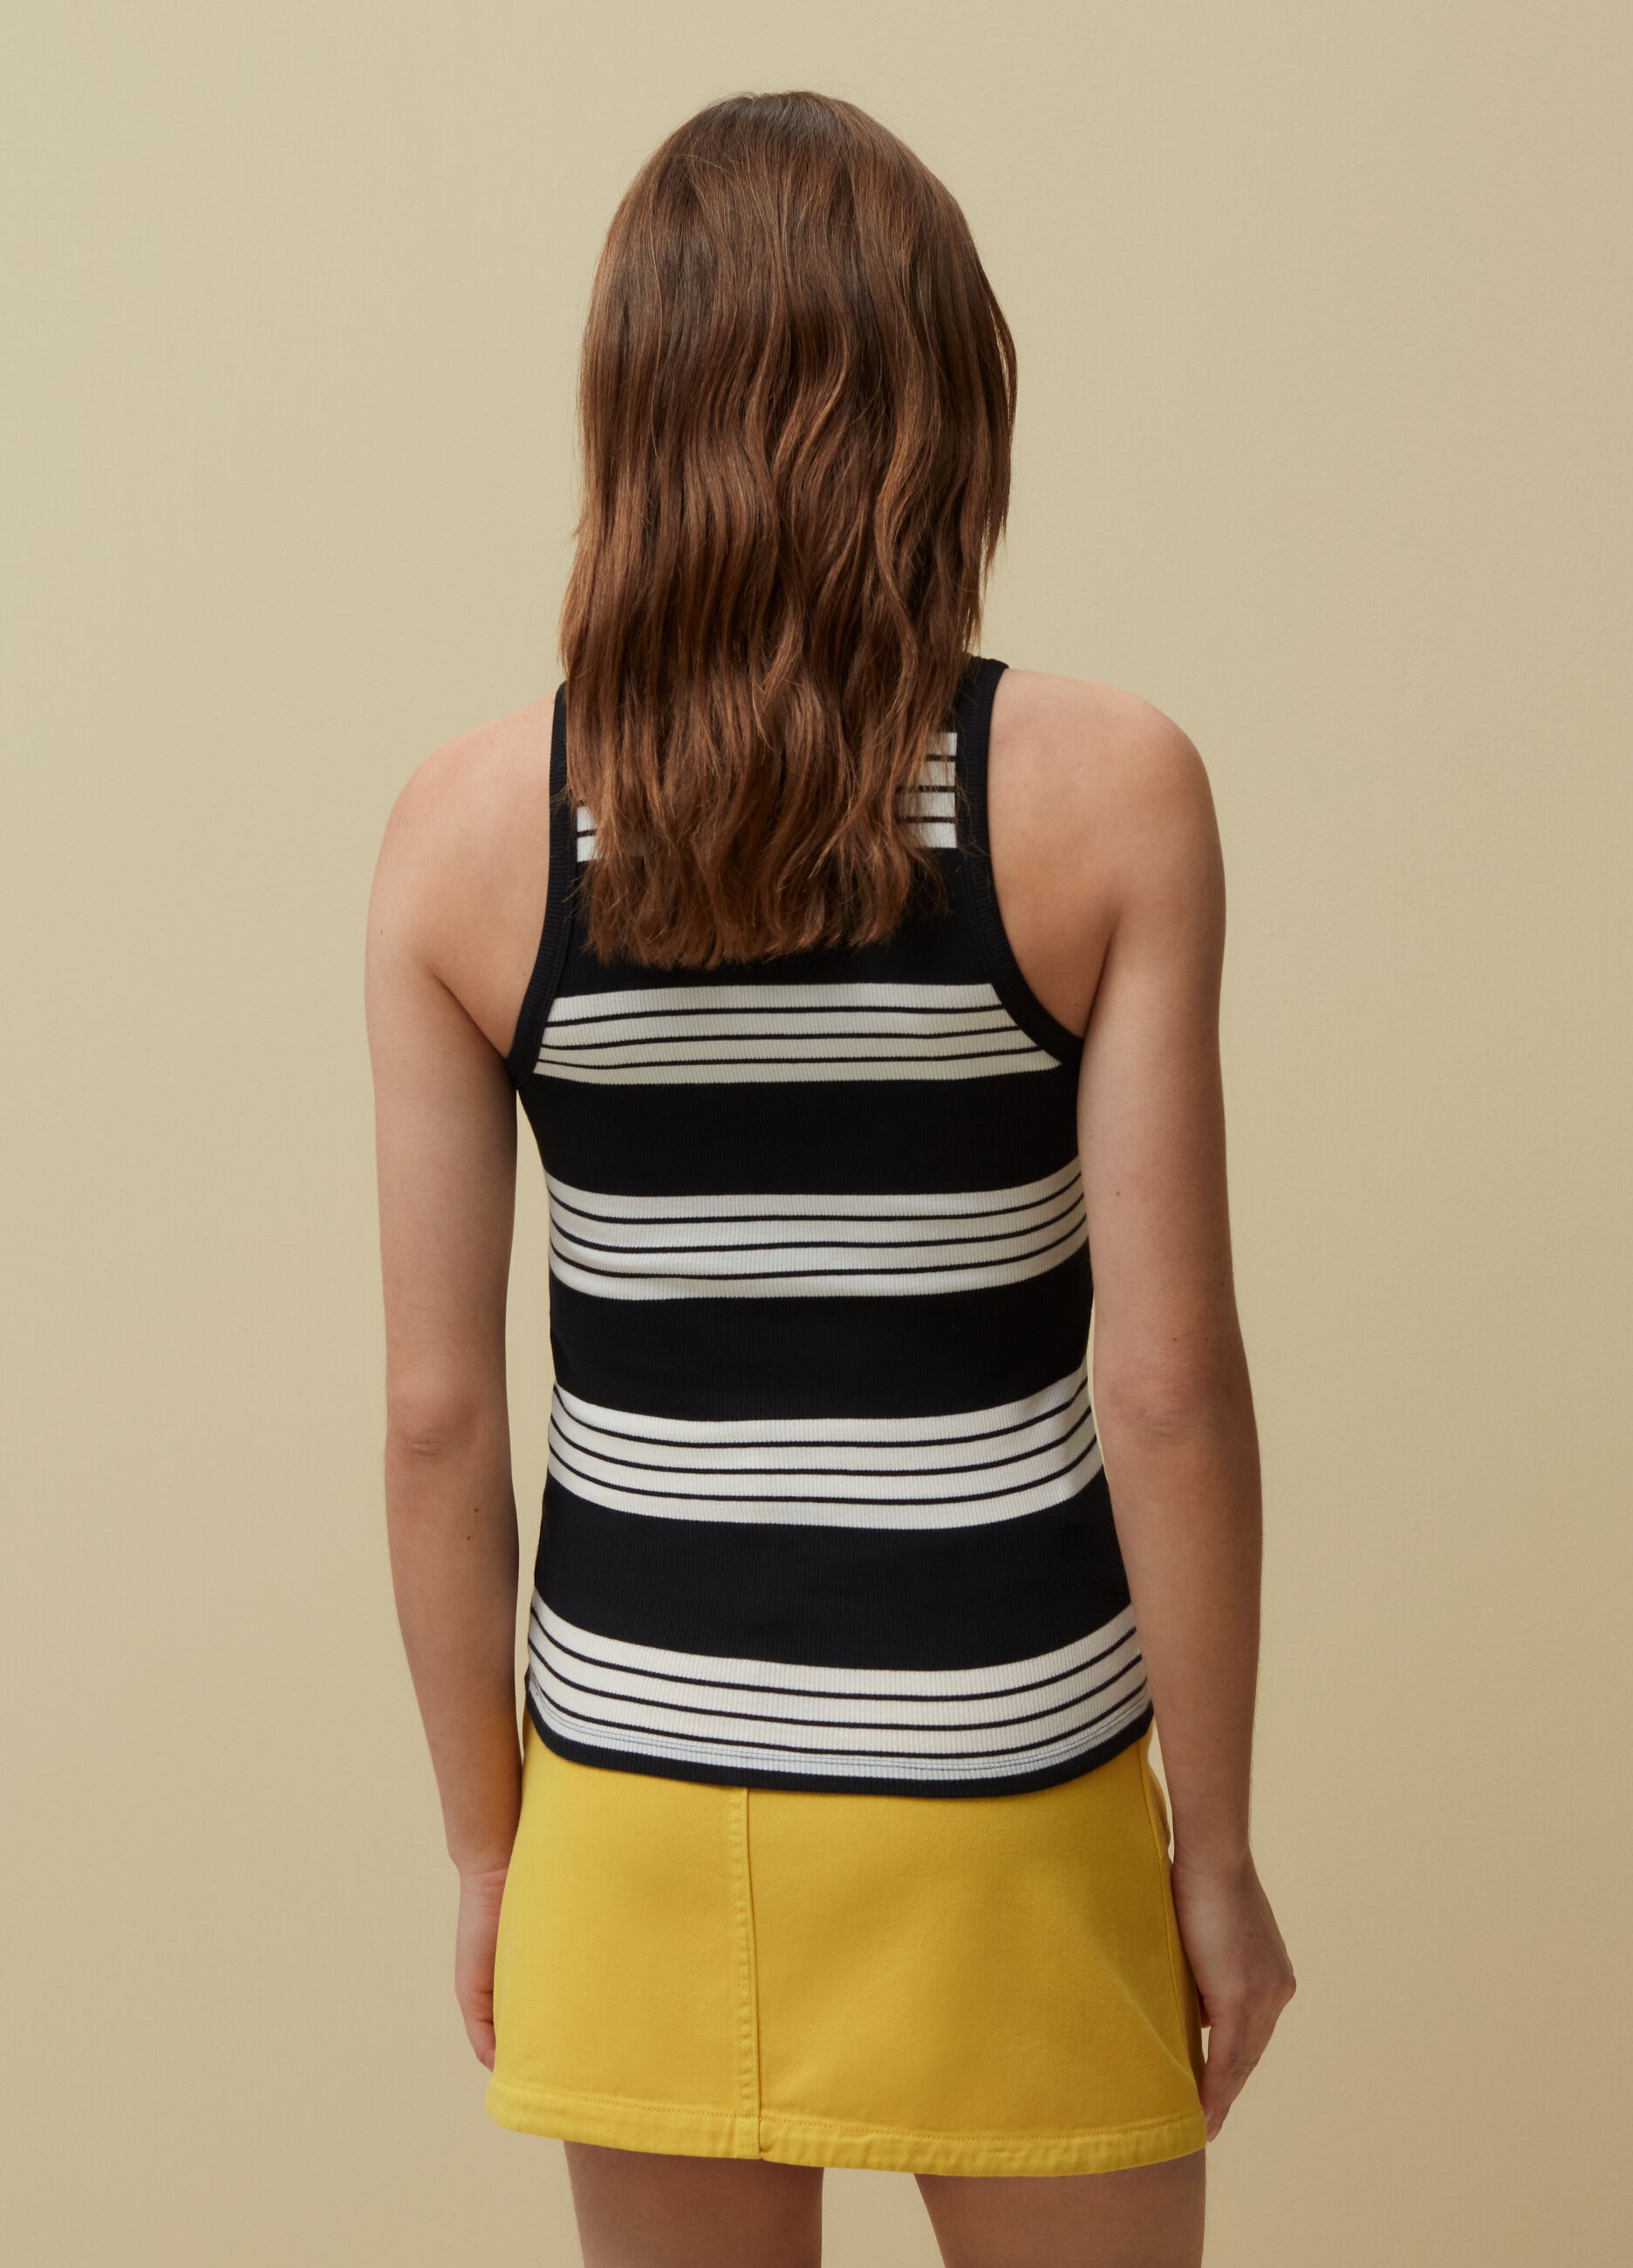 Ribbed tank top with striped pattern.